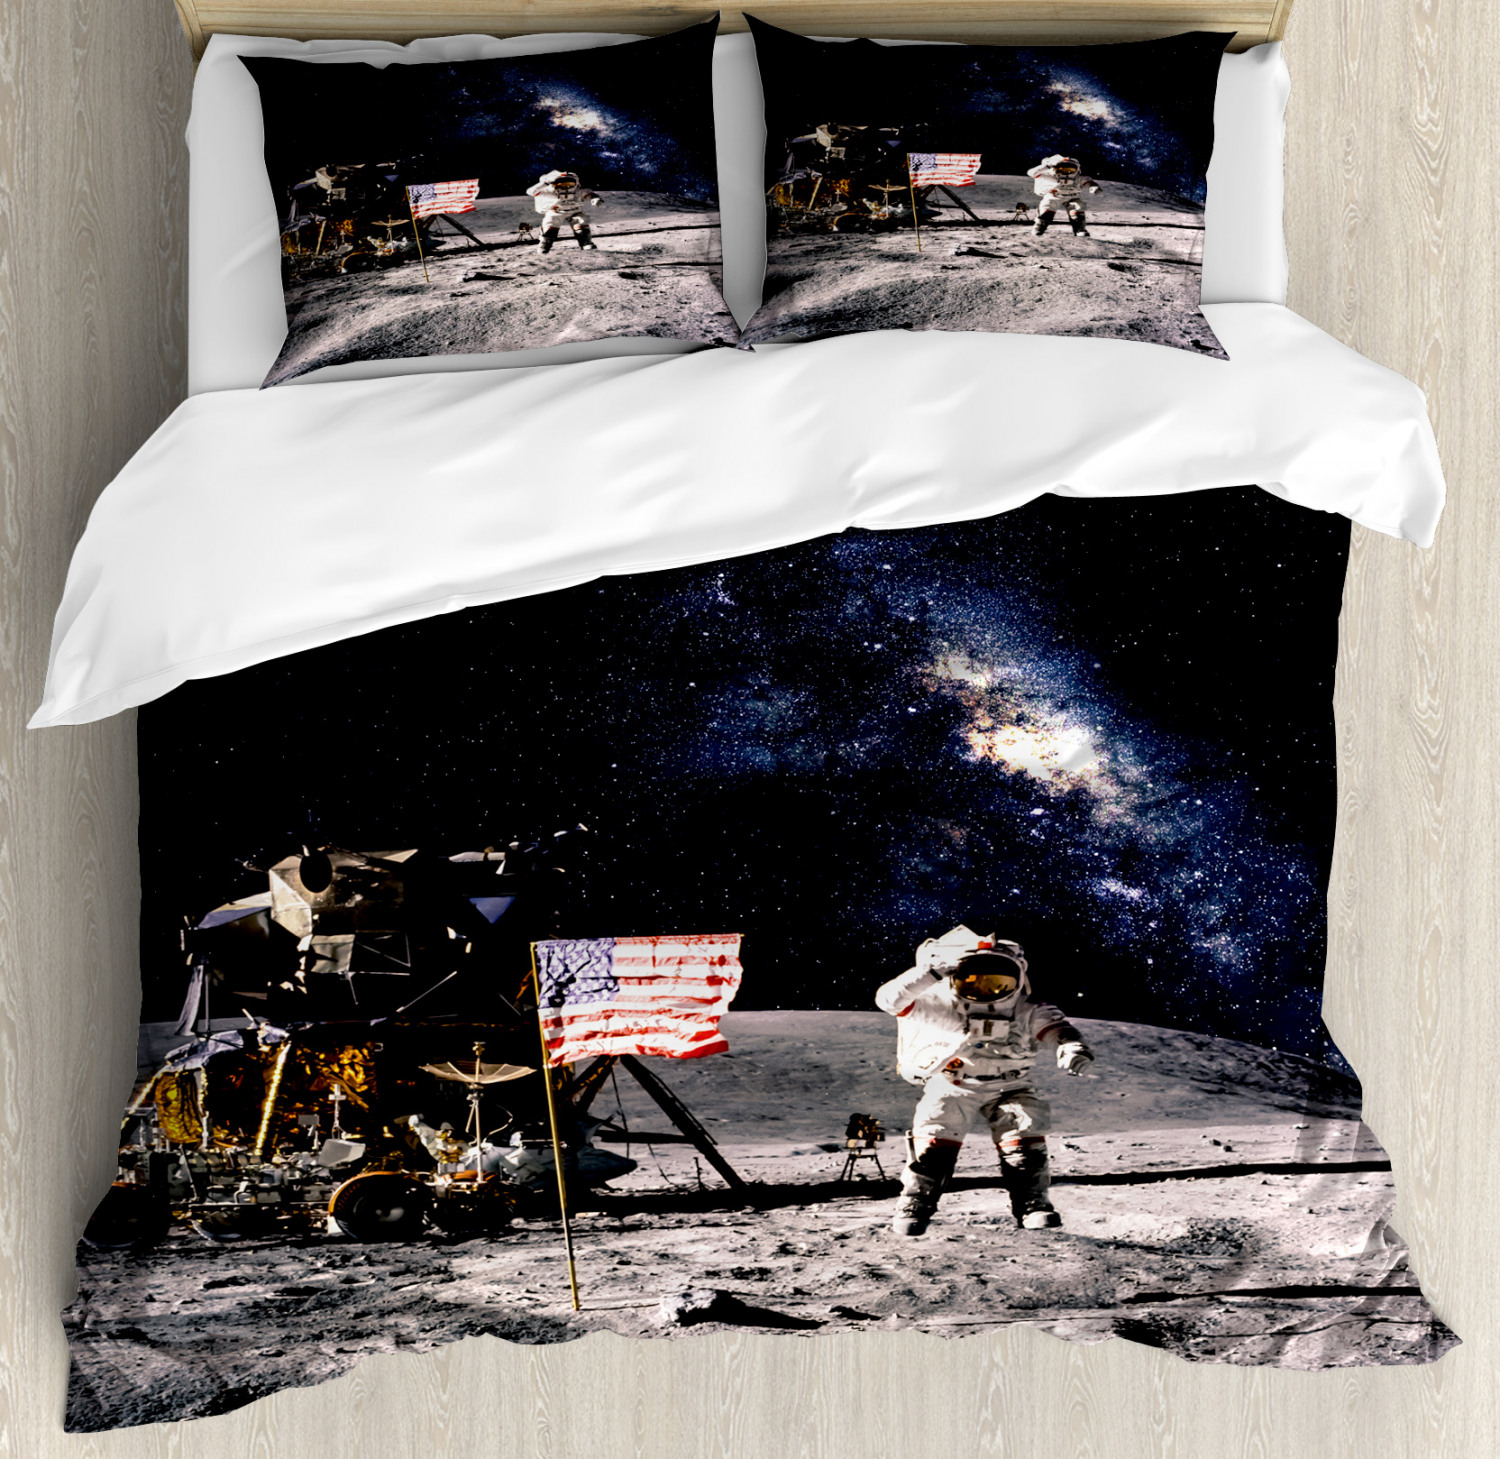 Galaxy Duvet Cover Set With Pillow Shams Rocket Travelling Space